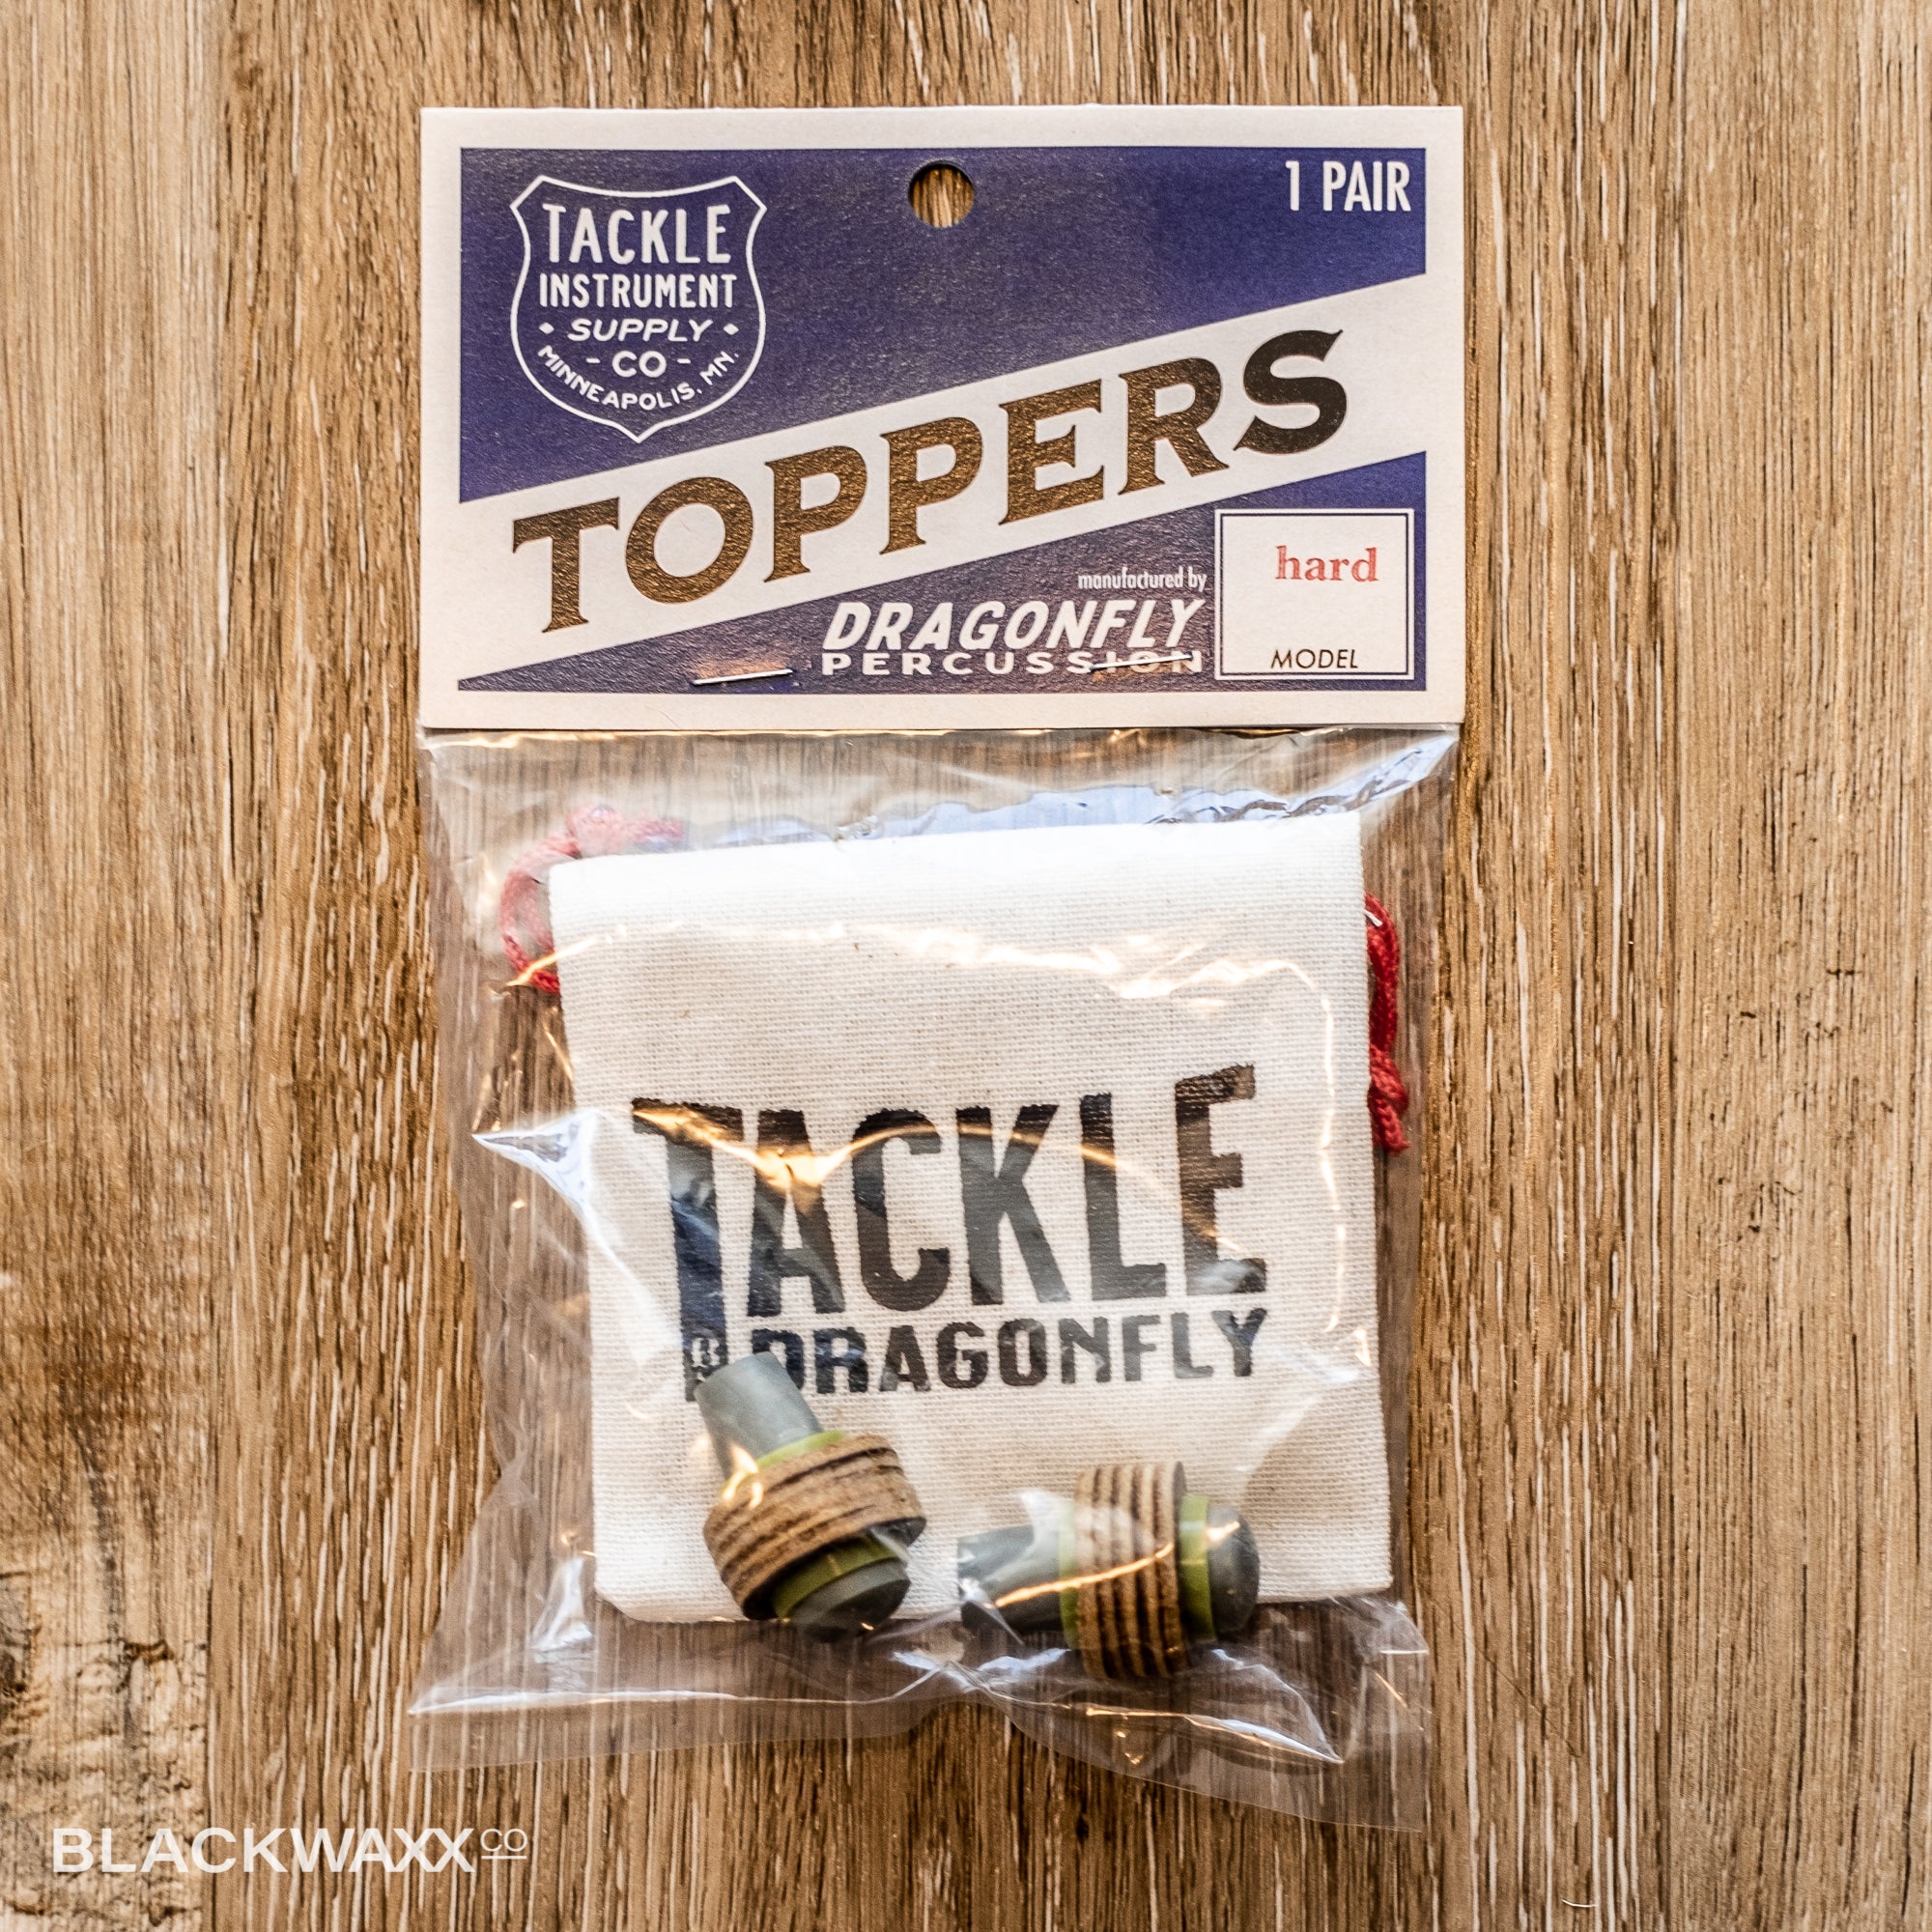 Tackle Instrument - Toppers (Hard)